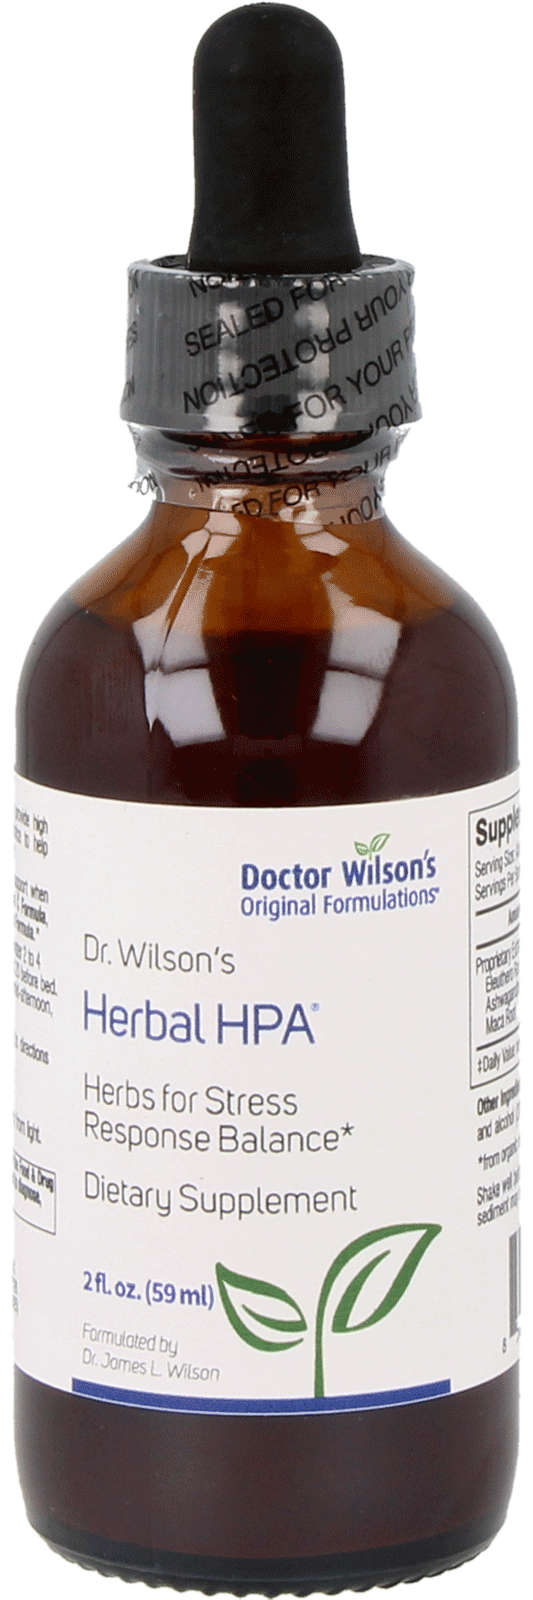 Dr. Wilson's Herbal HPA® 